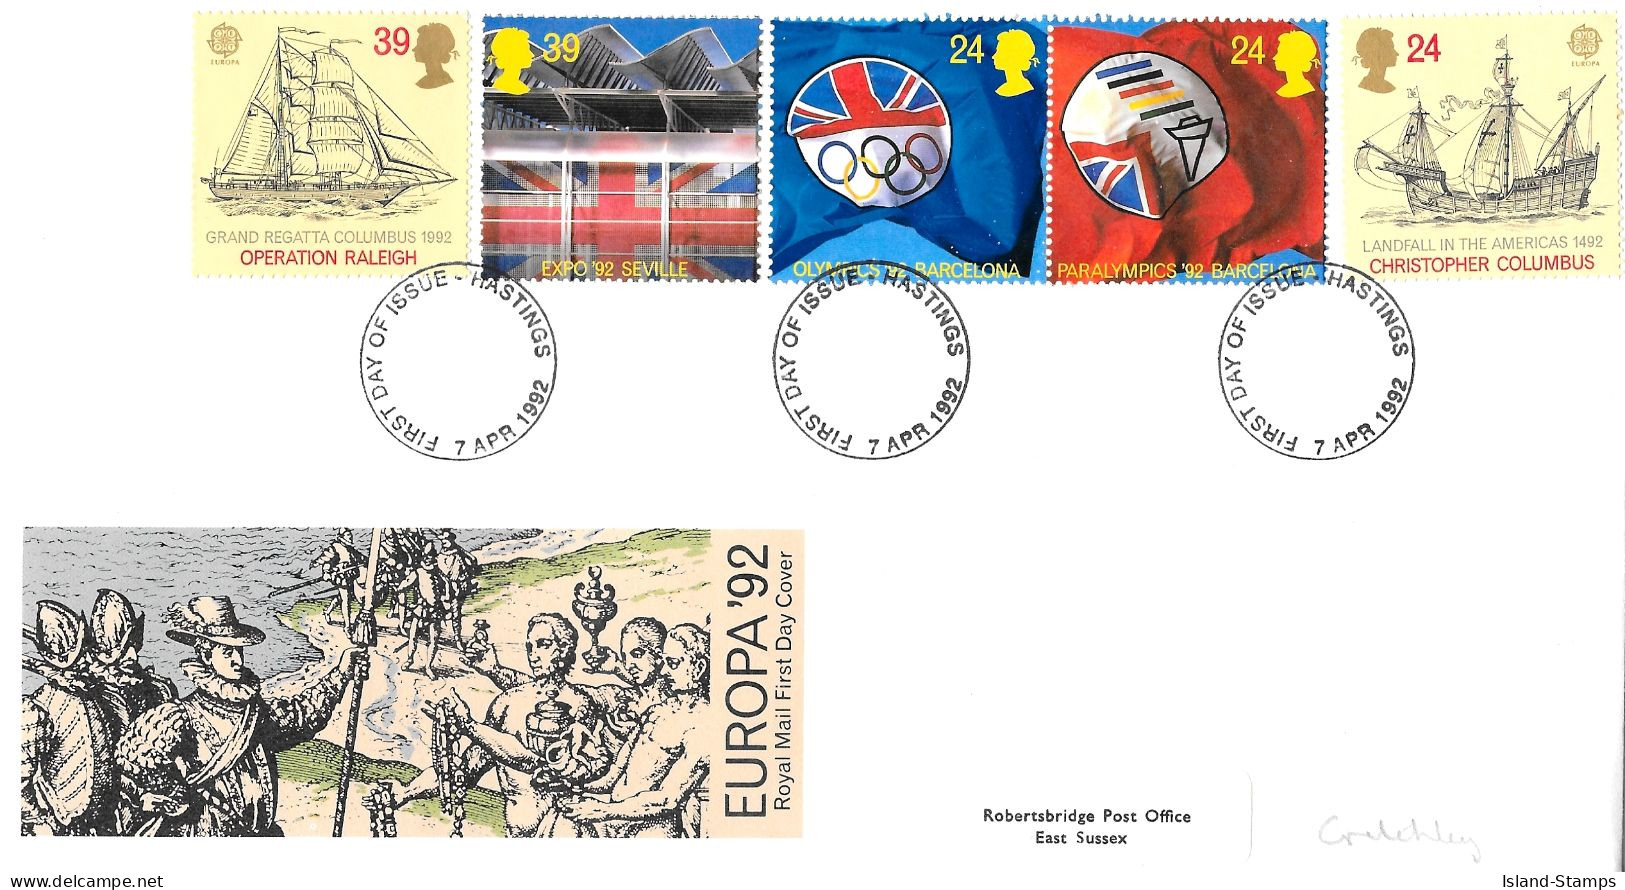 1992 Events Addressed FDC Tt - 1991-2000 Decimal Issues